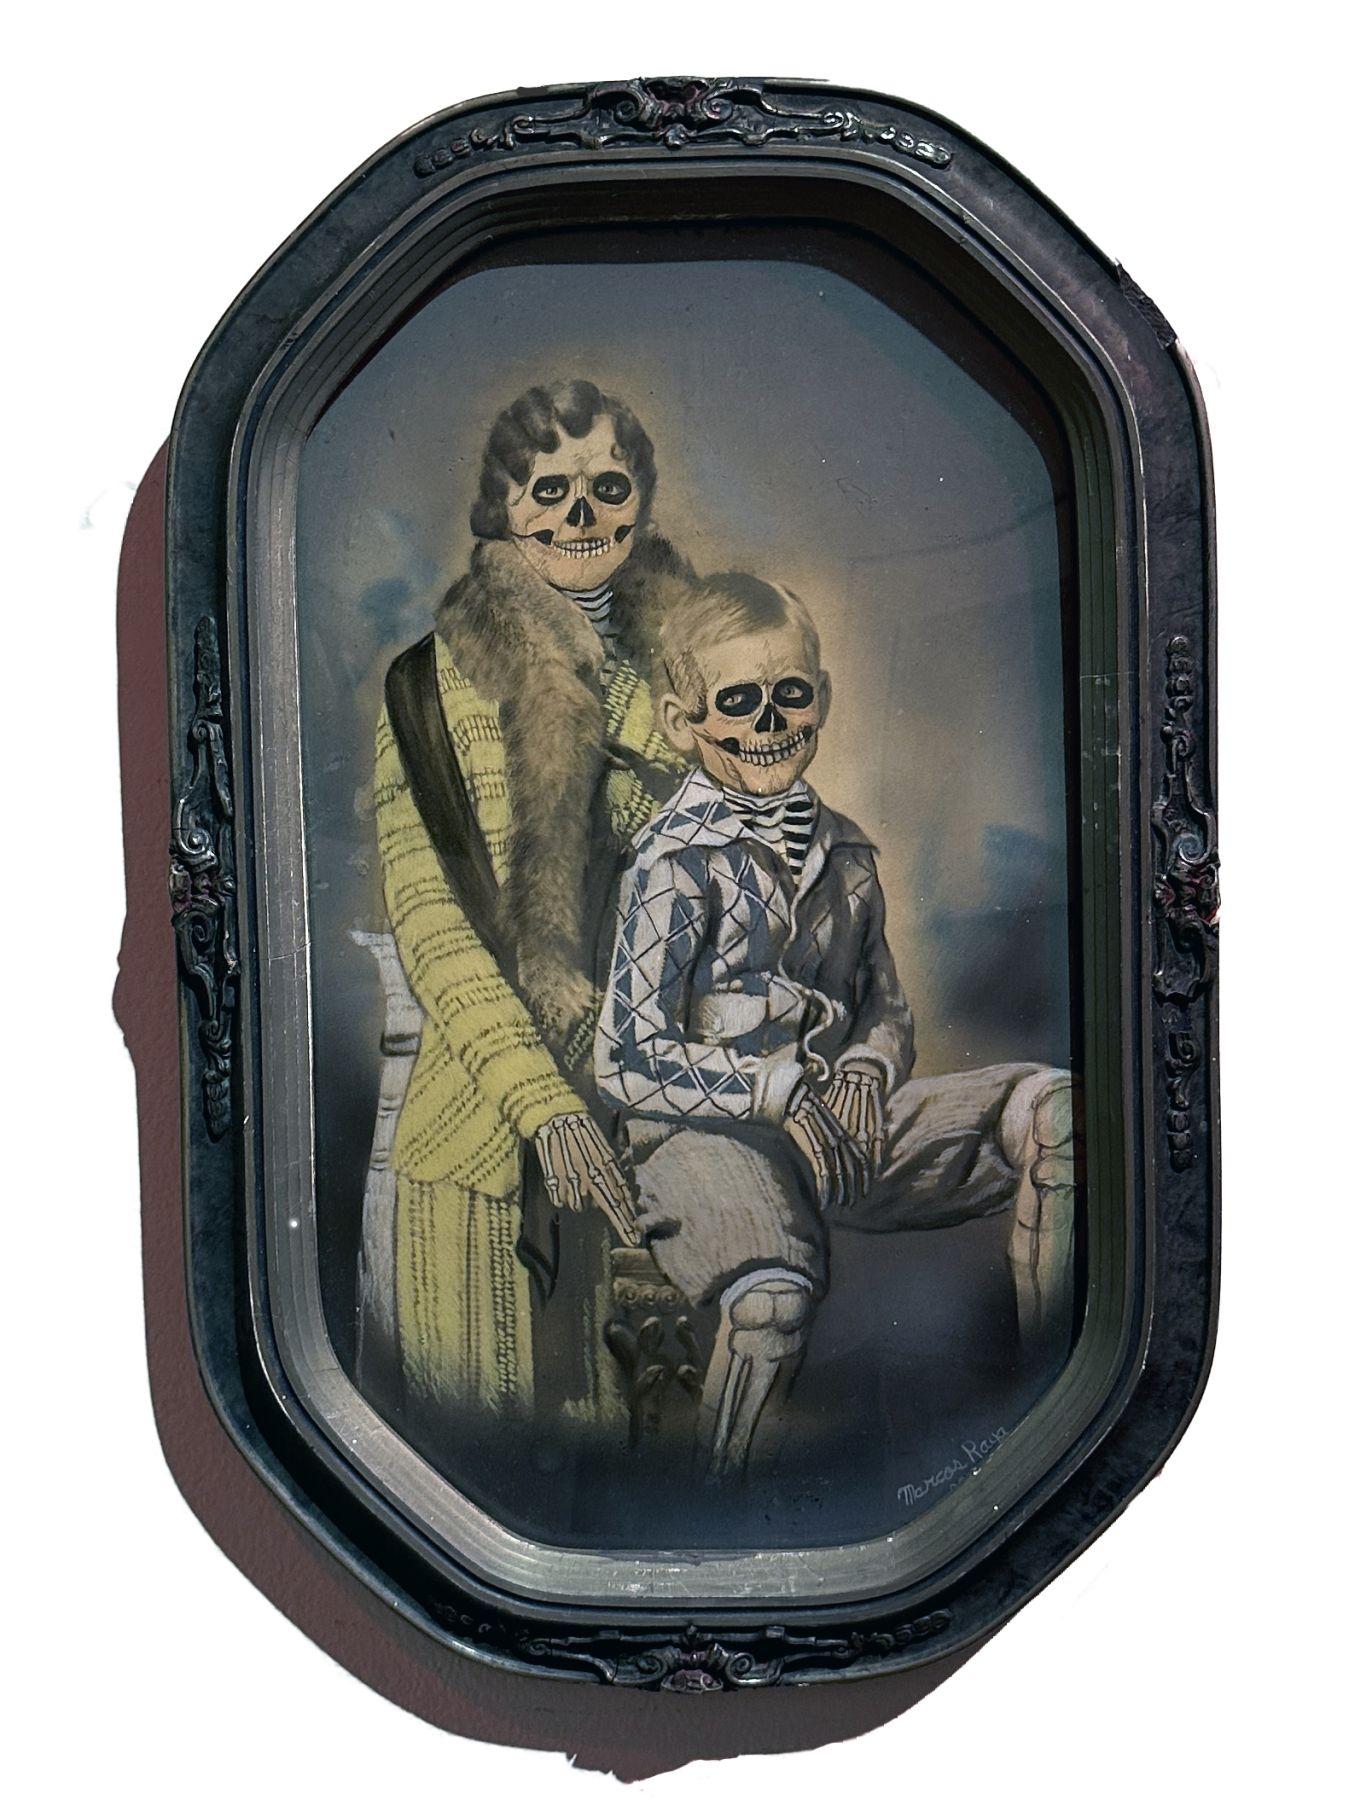 Mother And Child - Repainted Antique Photo in Frame - Mixed Media Art by Marcos Raya